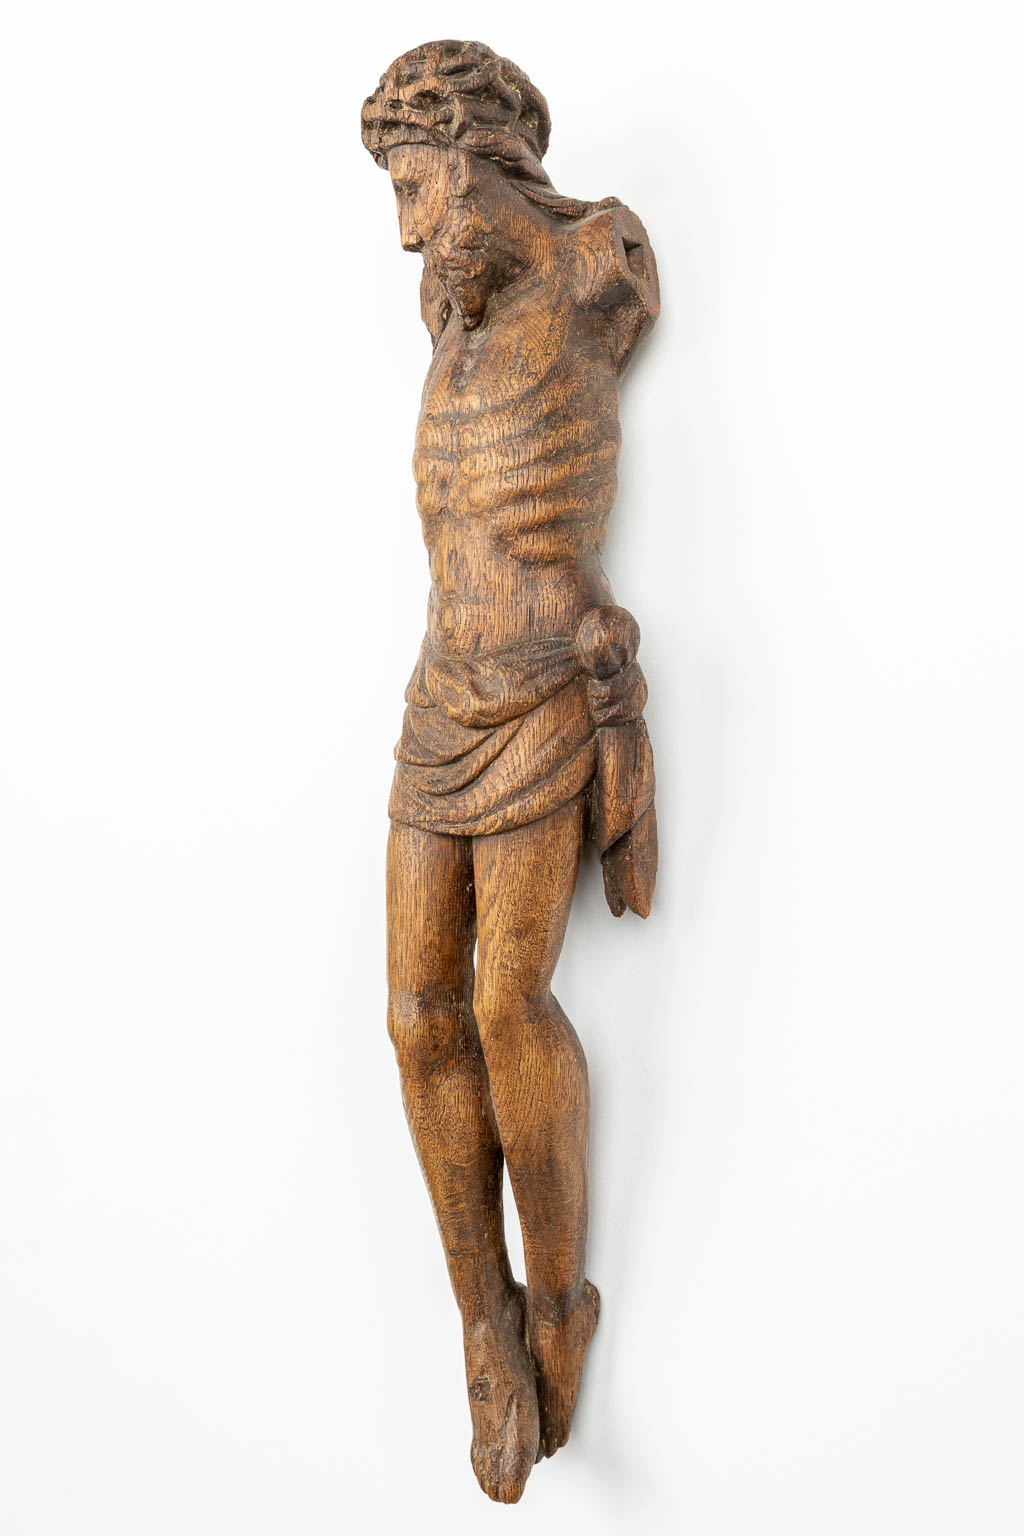 A wood sculptured corpus with a crown of thorns, 18th century. (H:76cm)